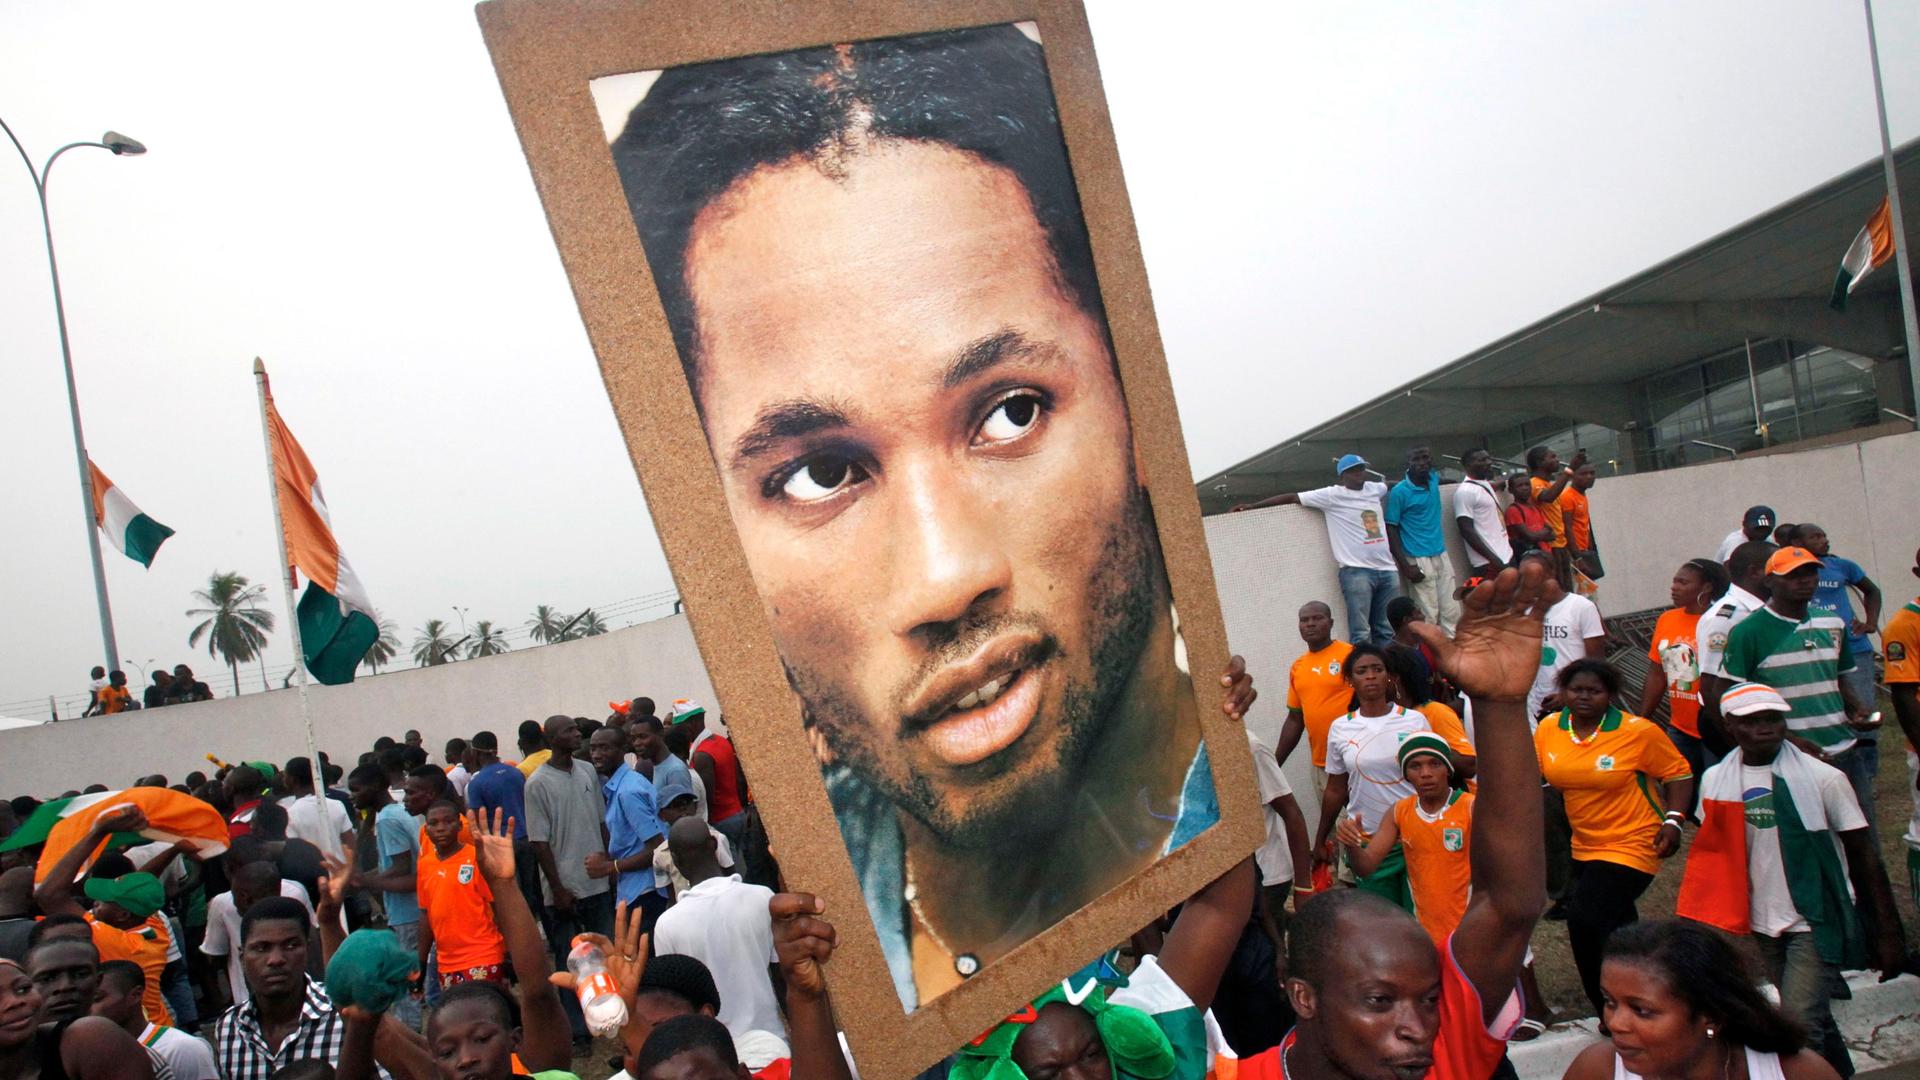 Fans in Abidjan, Ivory Coast, cheer for their hero, Didier Drogba. Drogba, a former African Player of the Year, is the inspiration for the term, 'drogbacité.'